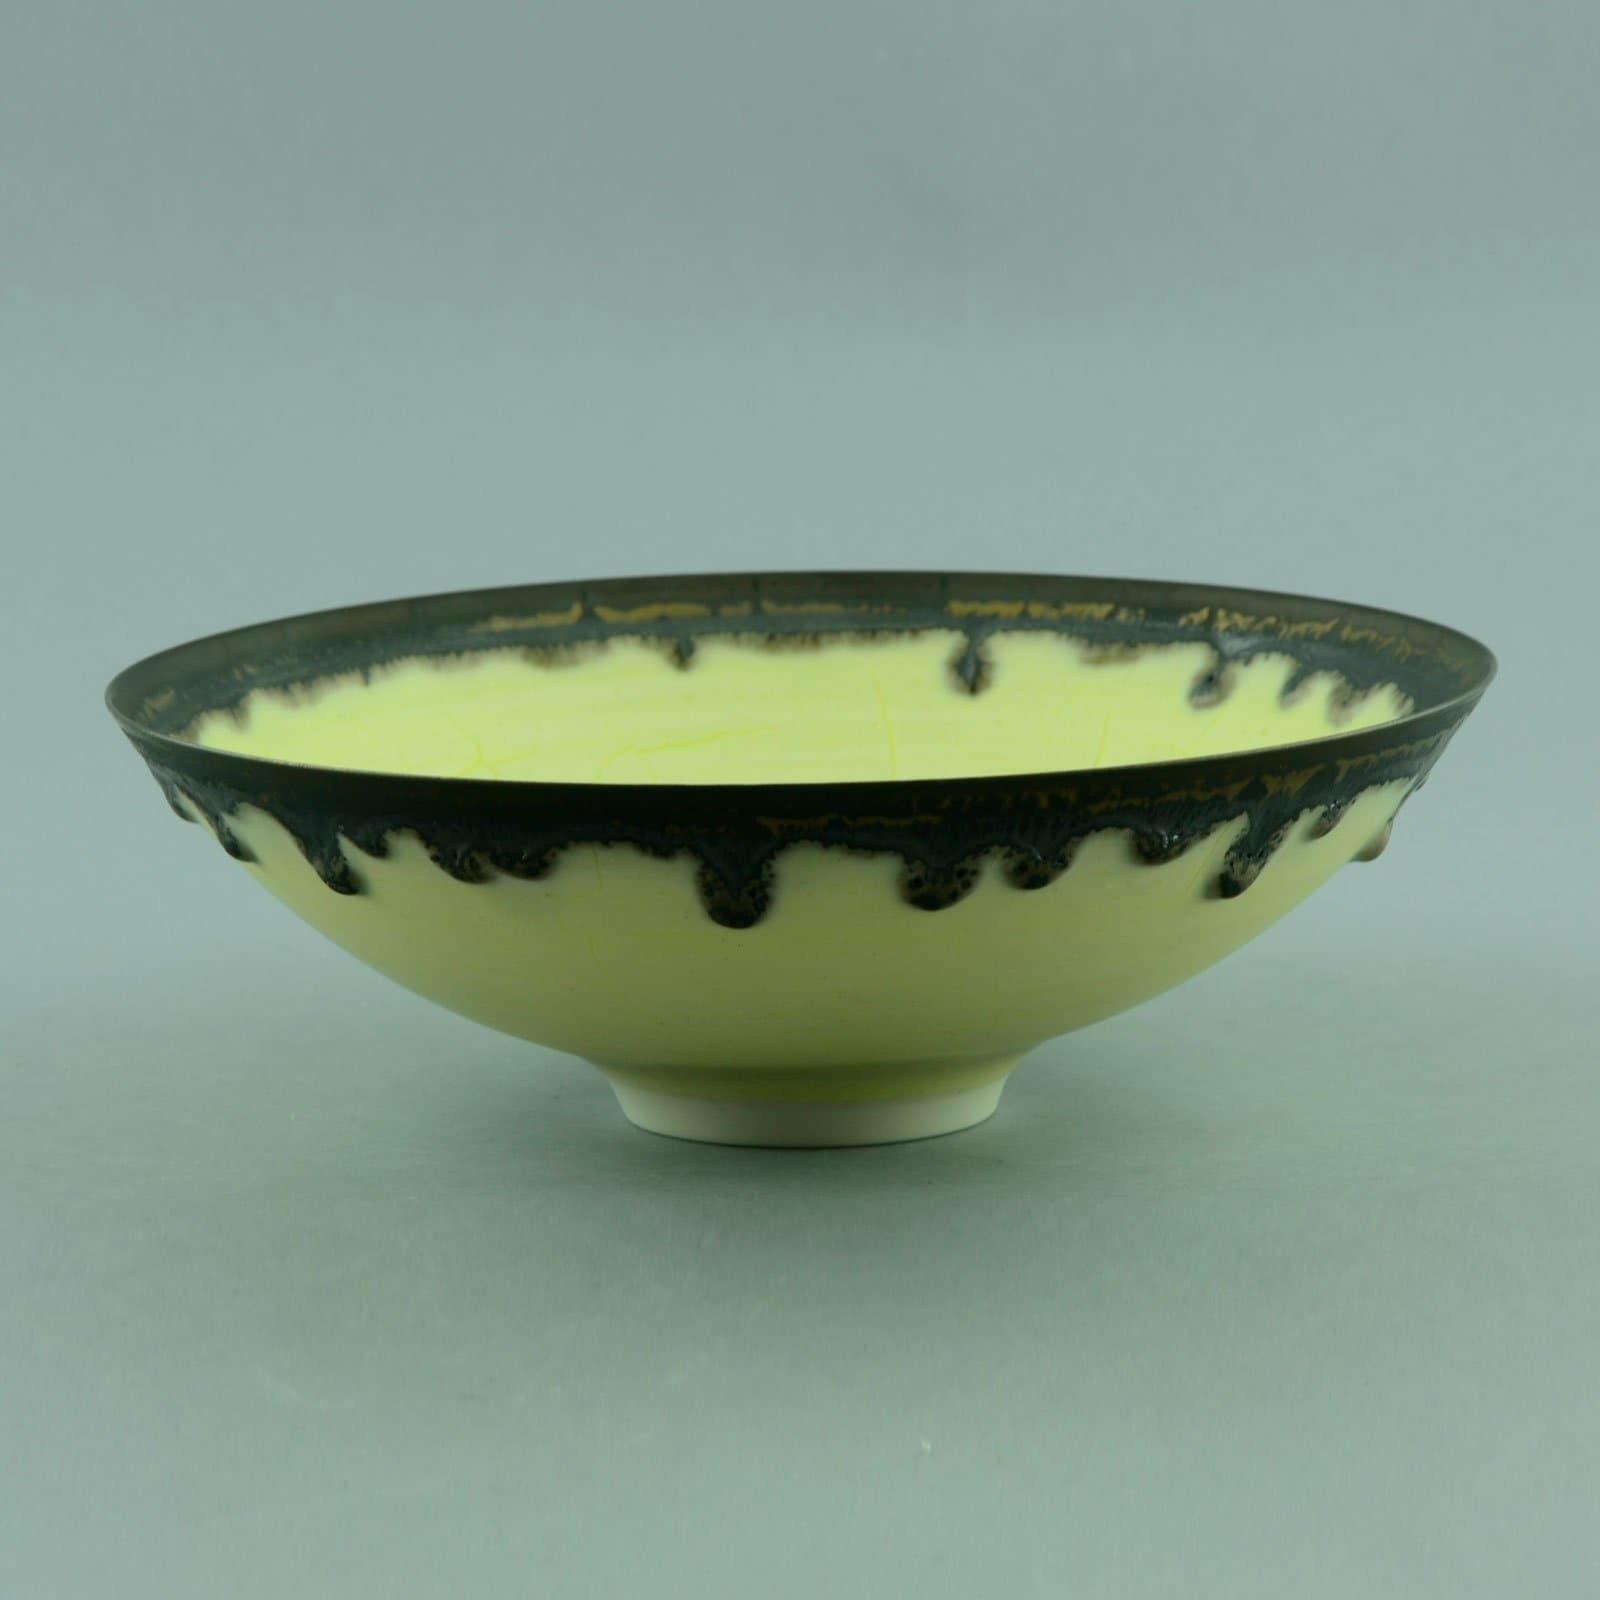 peter-wills-porcelain-bowl-with-yellow-and-metallic-brown-glaze-d6031